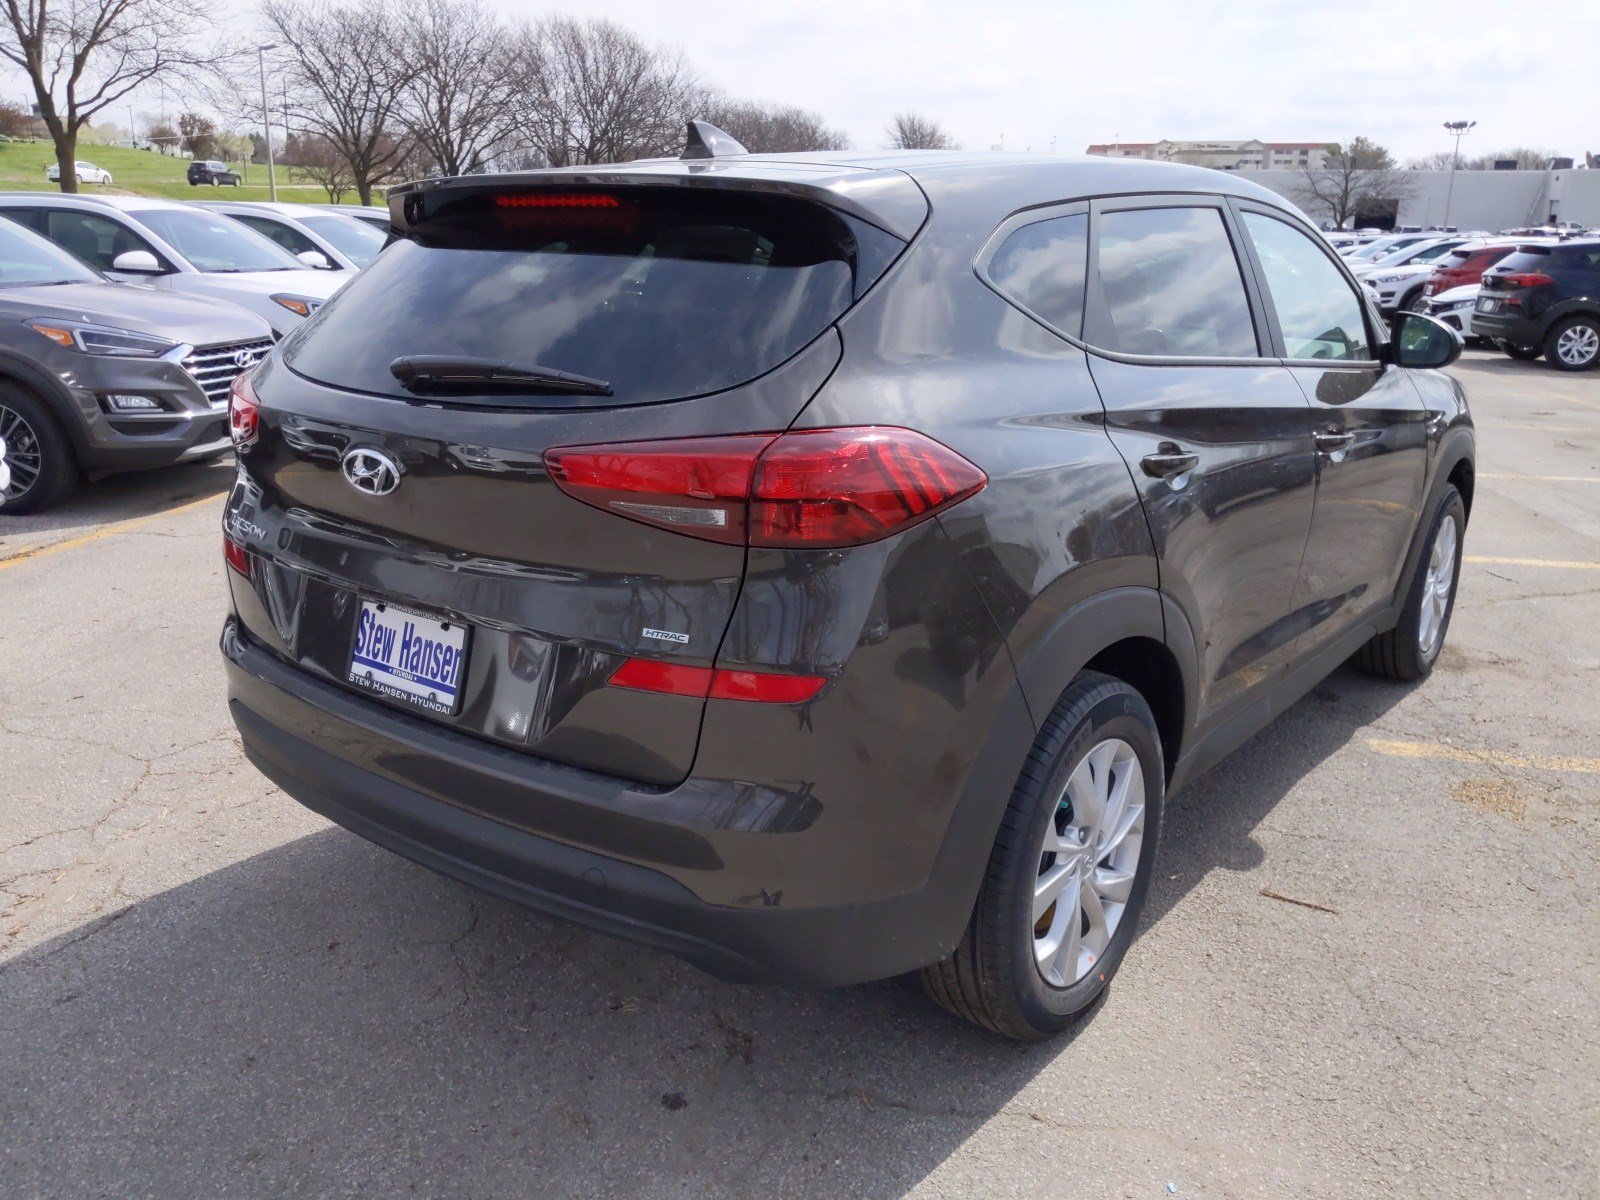 49 Top Pictures Hyundai Tucson Sport 2020 For Sale : New 2020 Hyundai Tucson SE for Sale in Columbus OH #20H628 ...